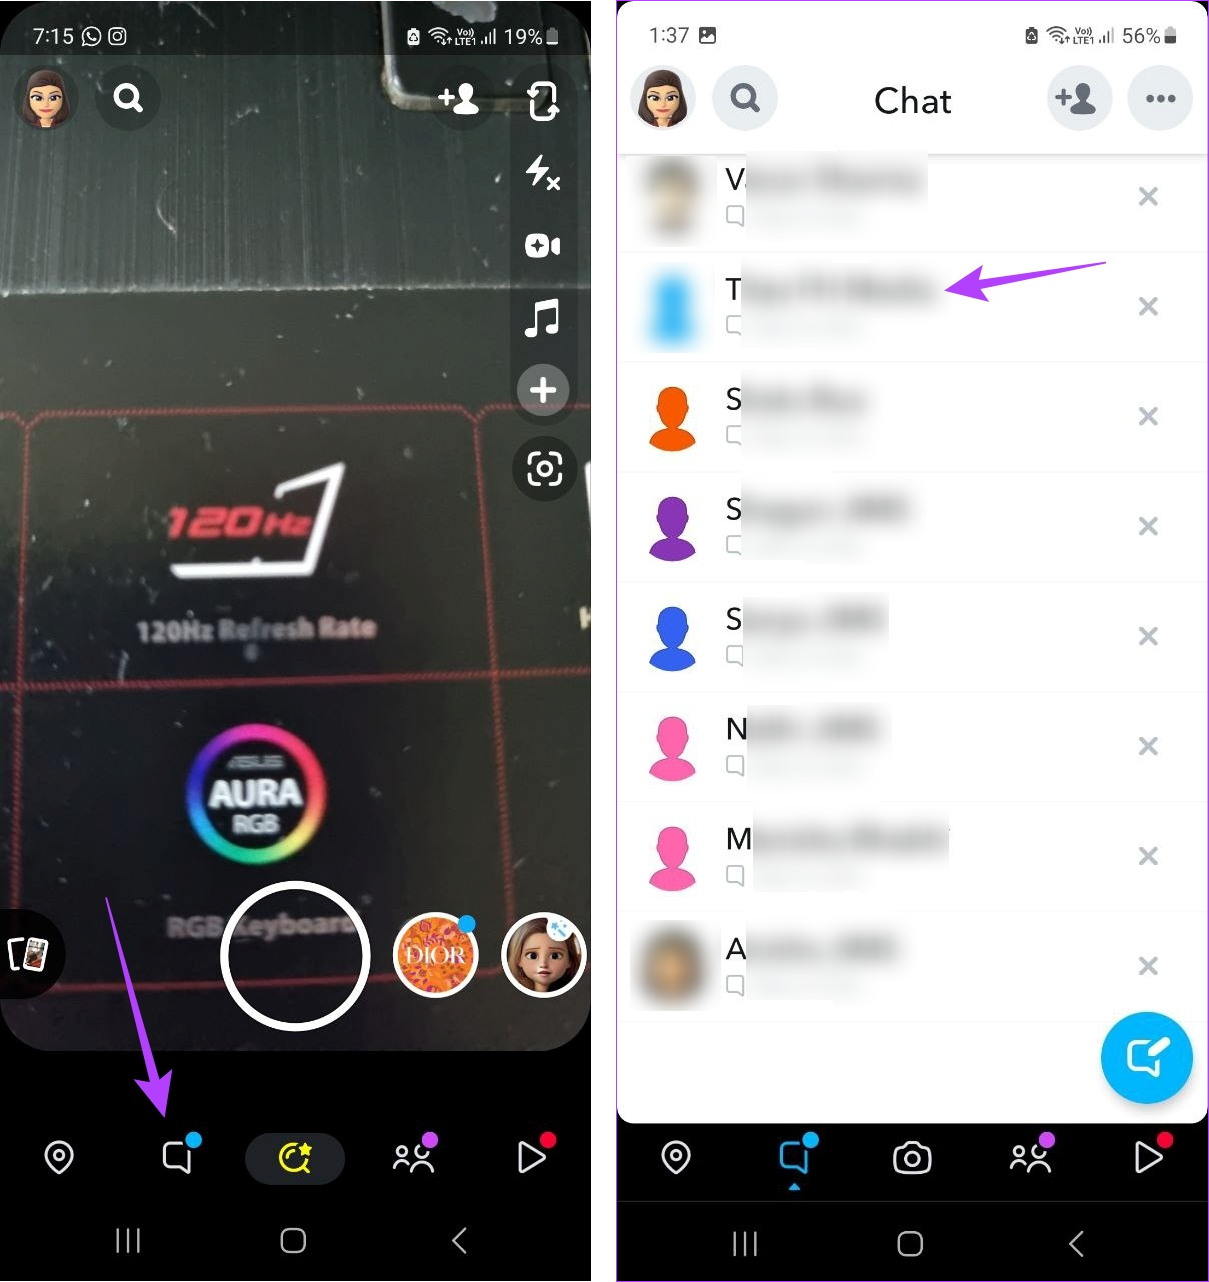 Open Chat window on Snapchat